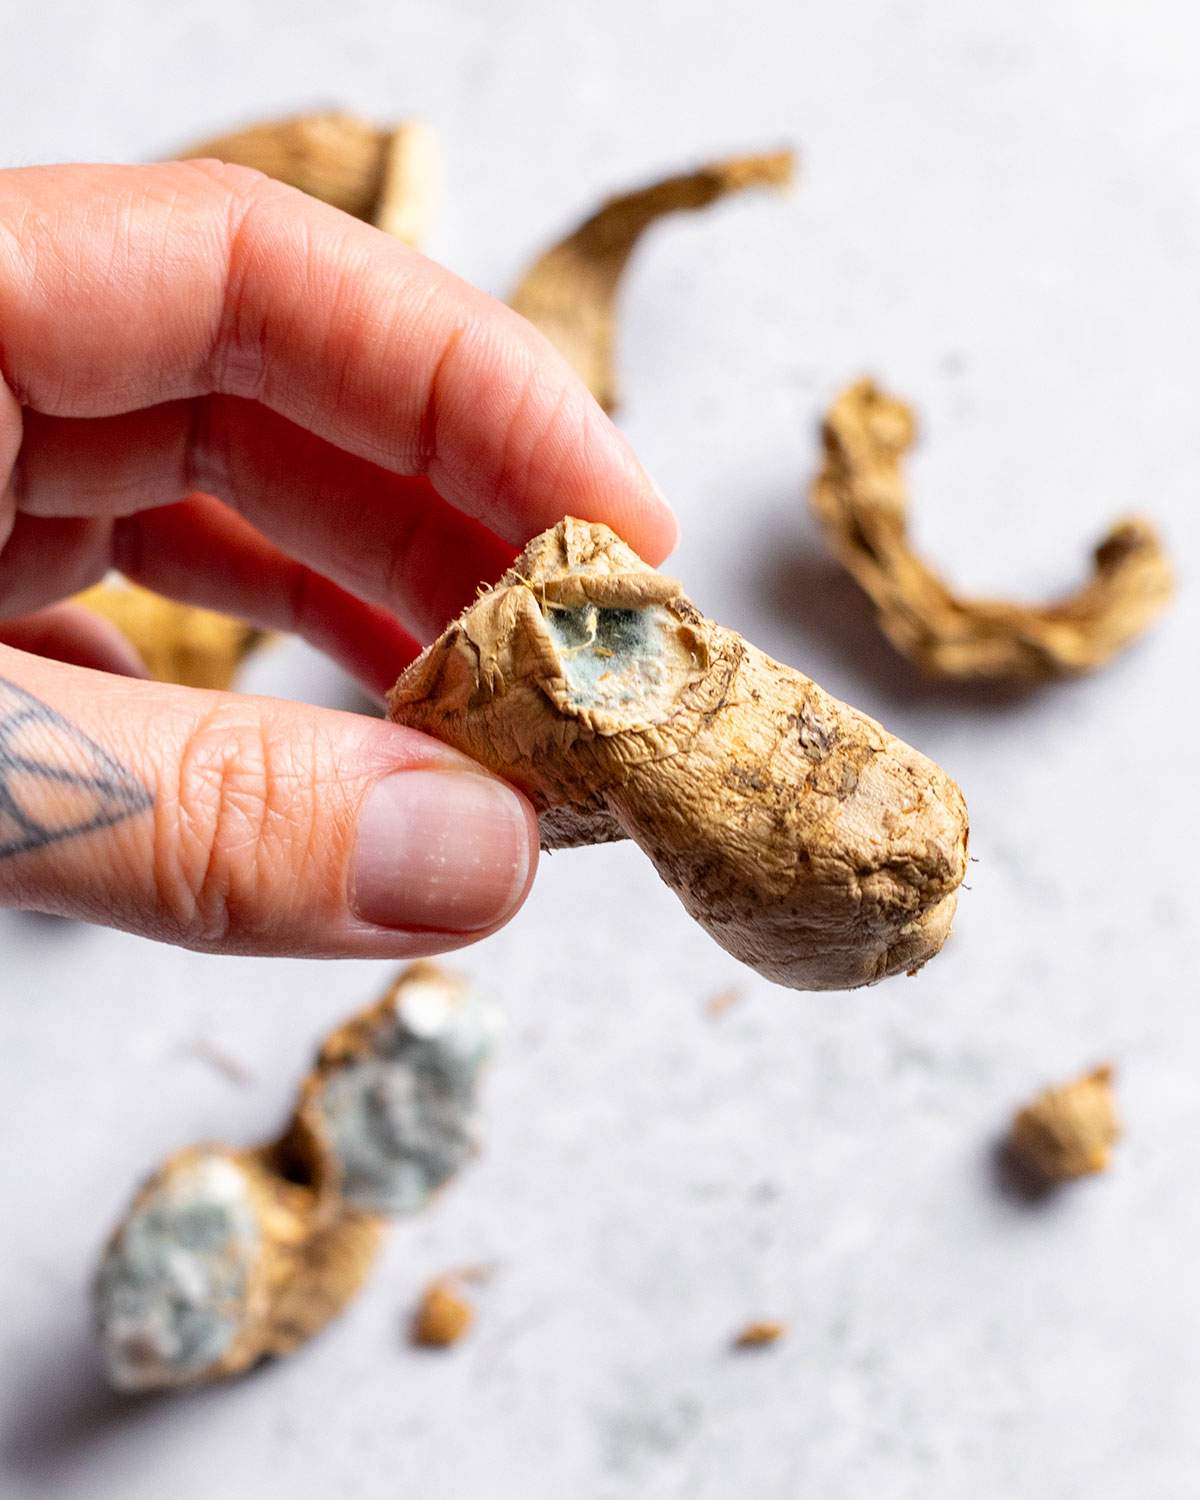 A hand holding a piece of ginger with a moldy edge.